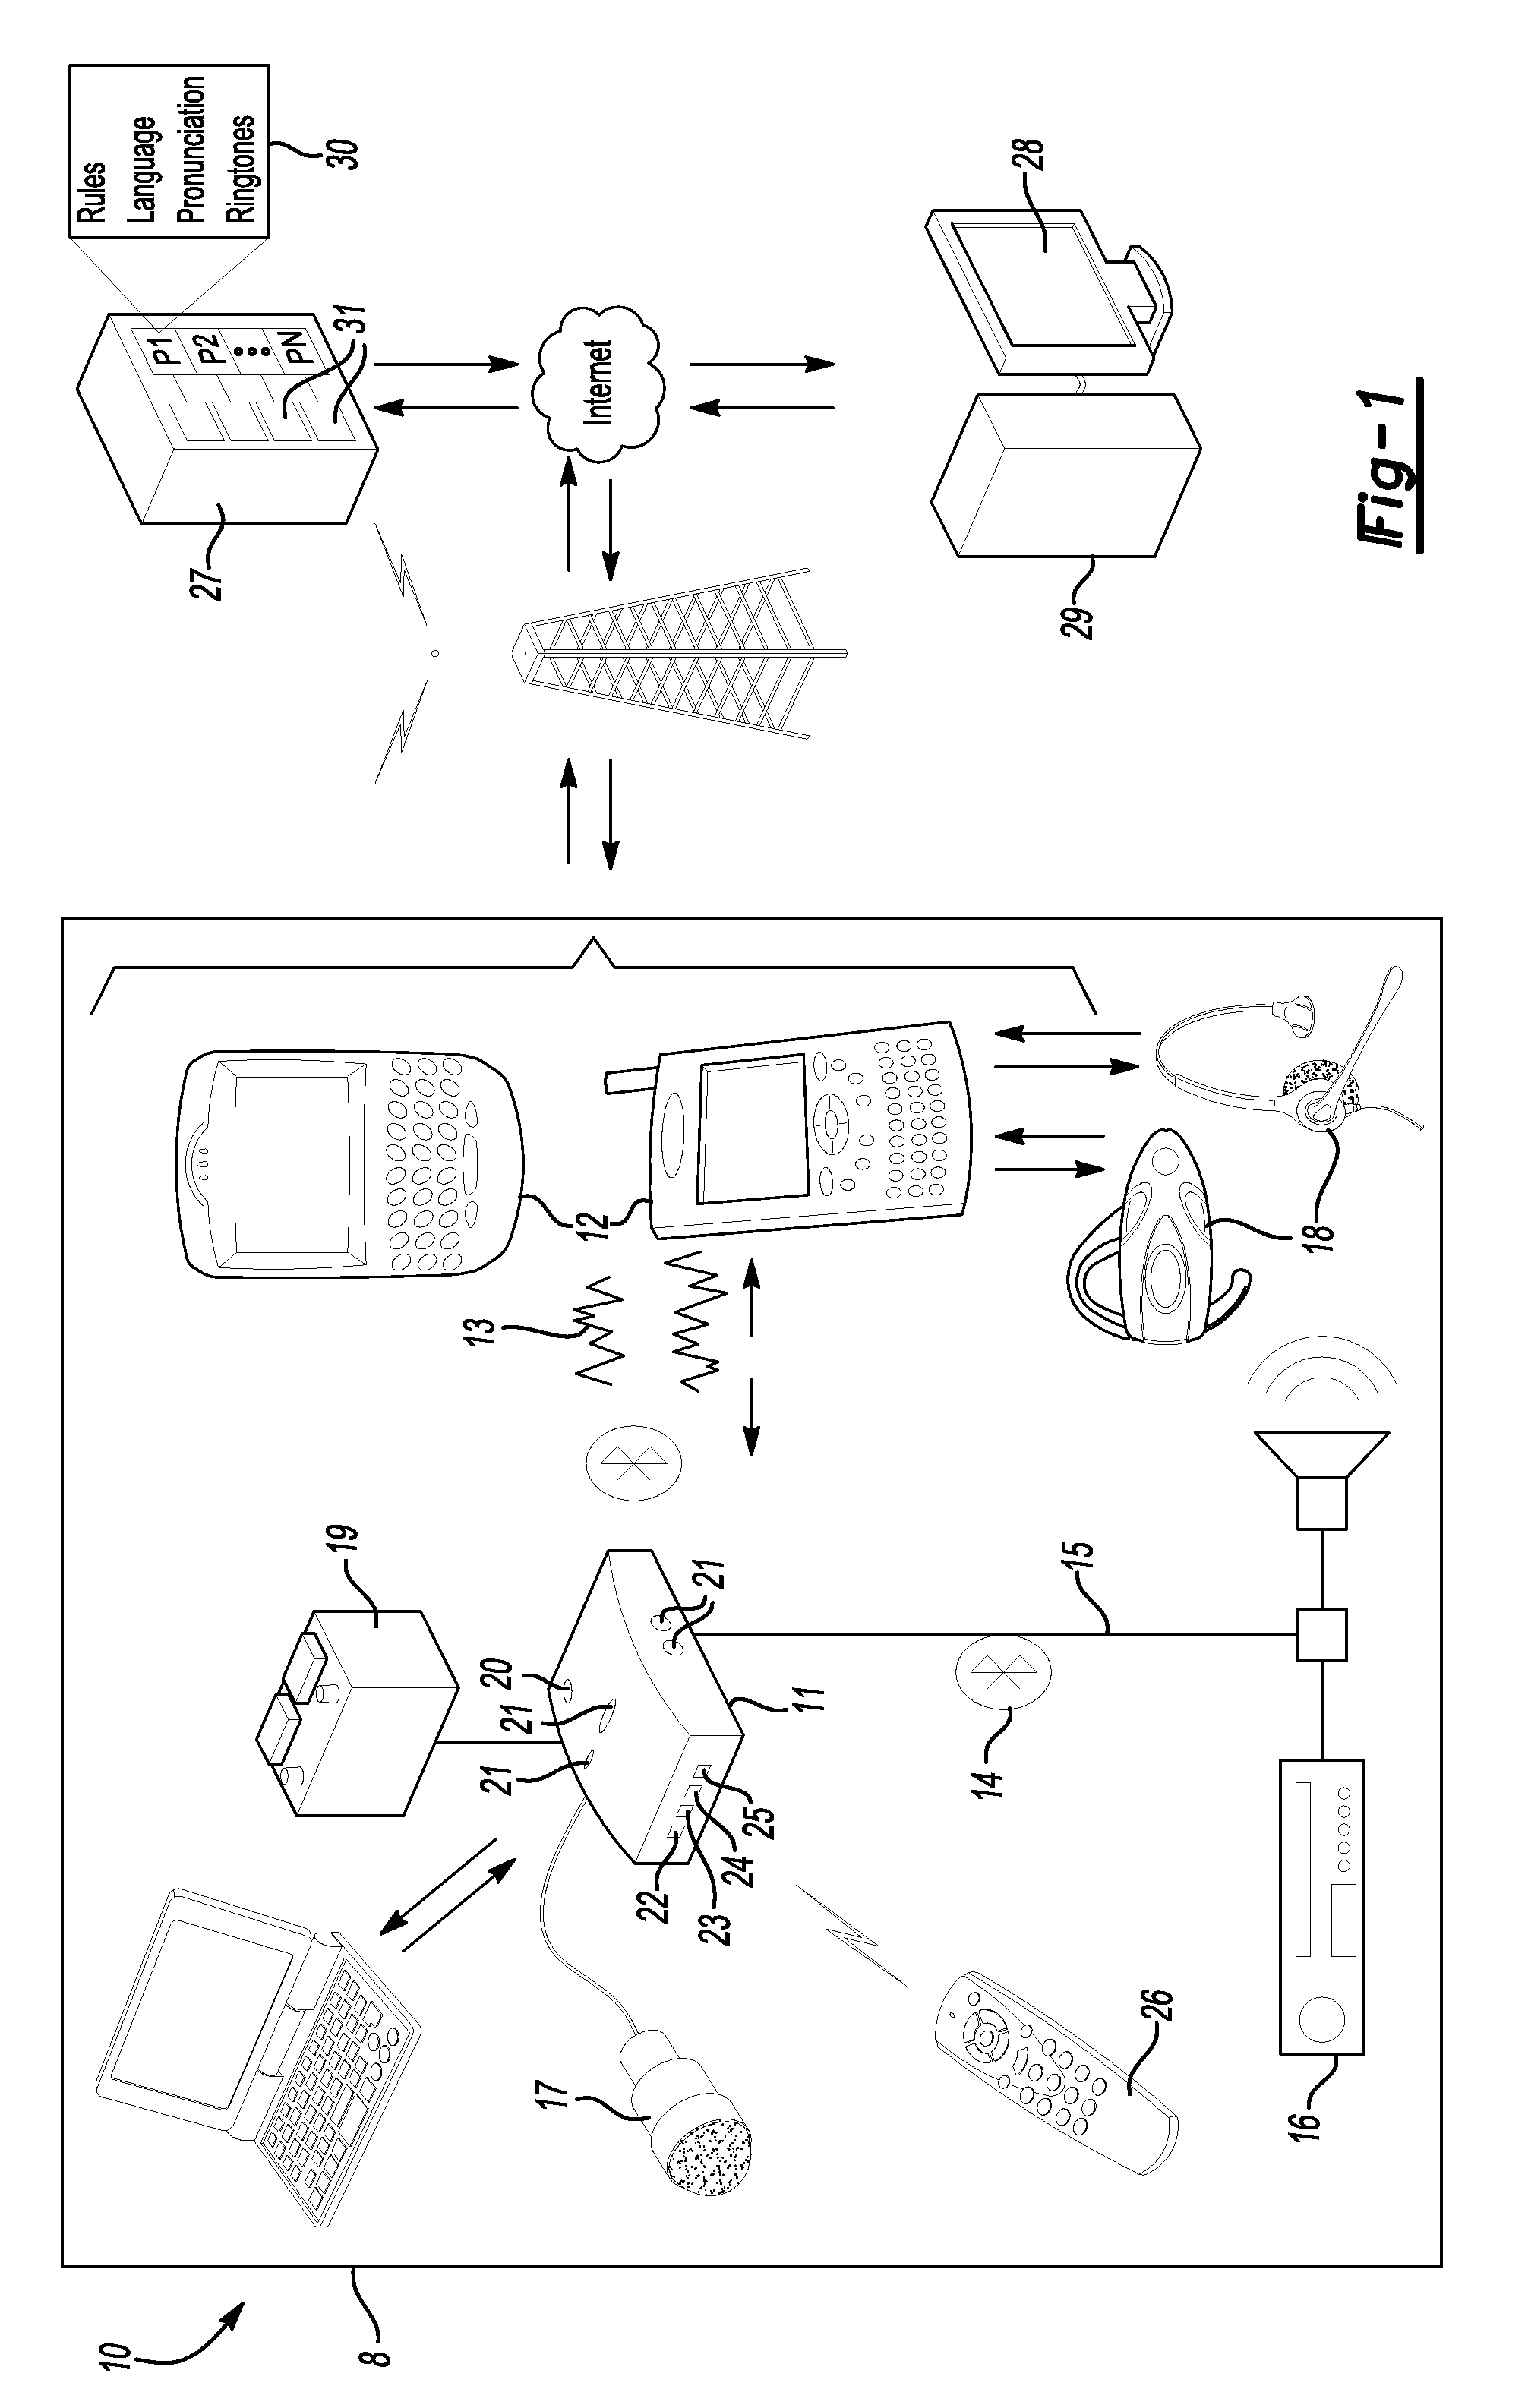 Multi-participant, mixed-initiative voice interaction system